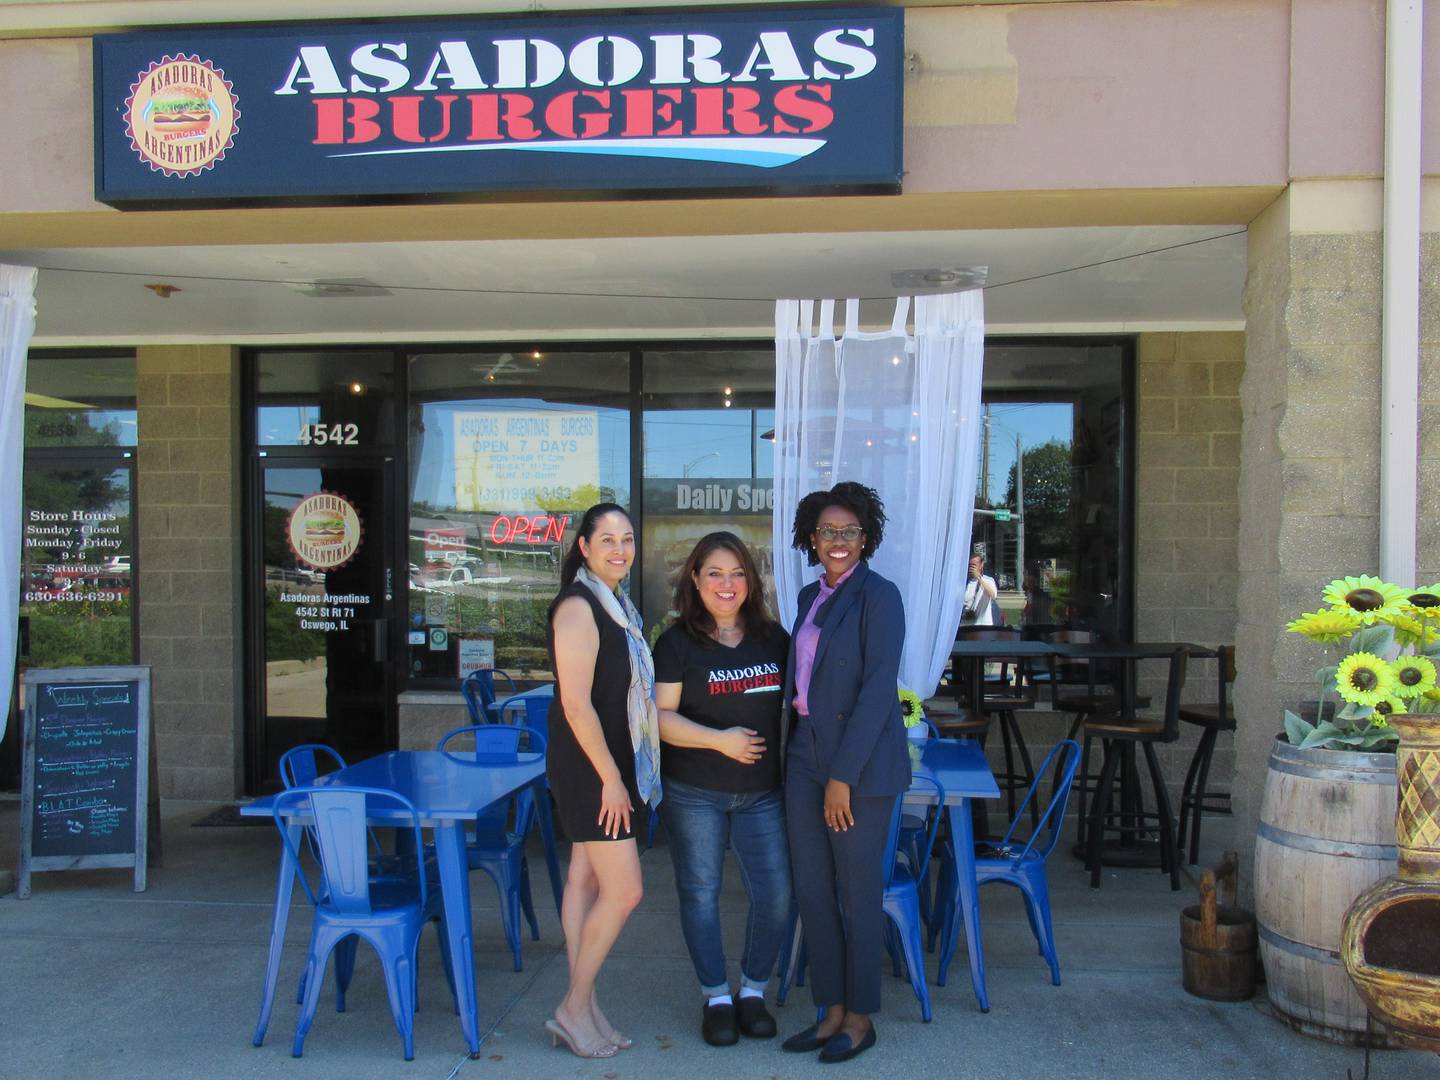 Part owner of Asadoras Argentina Burgers, Erica Caballos with Congresswoman Lauren Underwood and Marisa Alcantar, during a latinx small business tour Thursday, Aug. 11 2022, at 4542 IL-71 in Oswego. (from left to right: Alcantar, Caballos, Underwood)